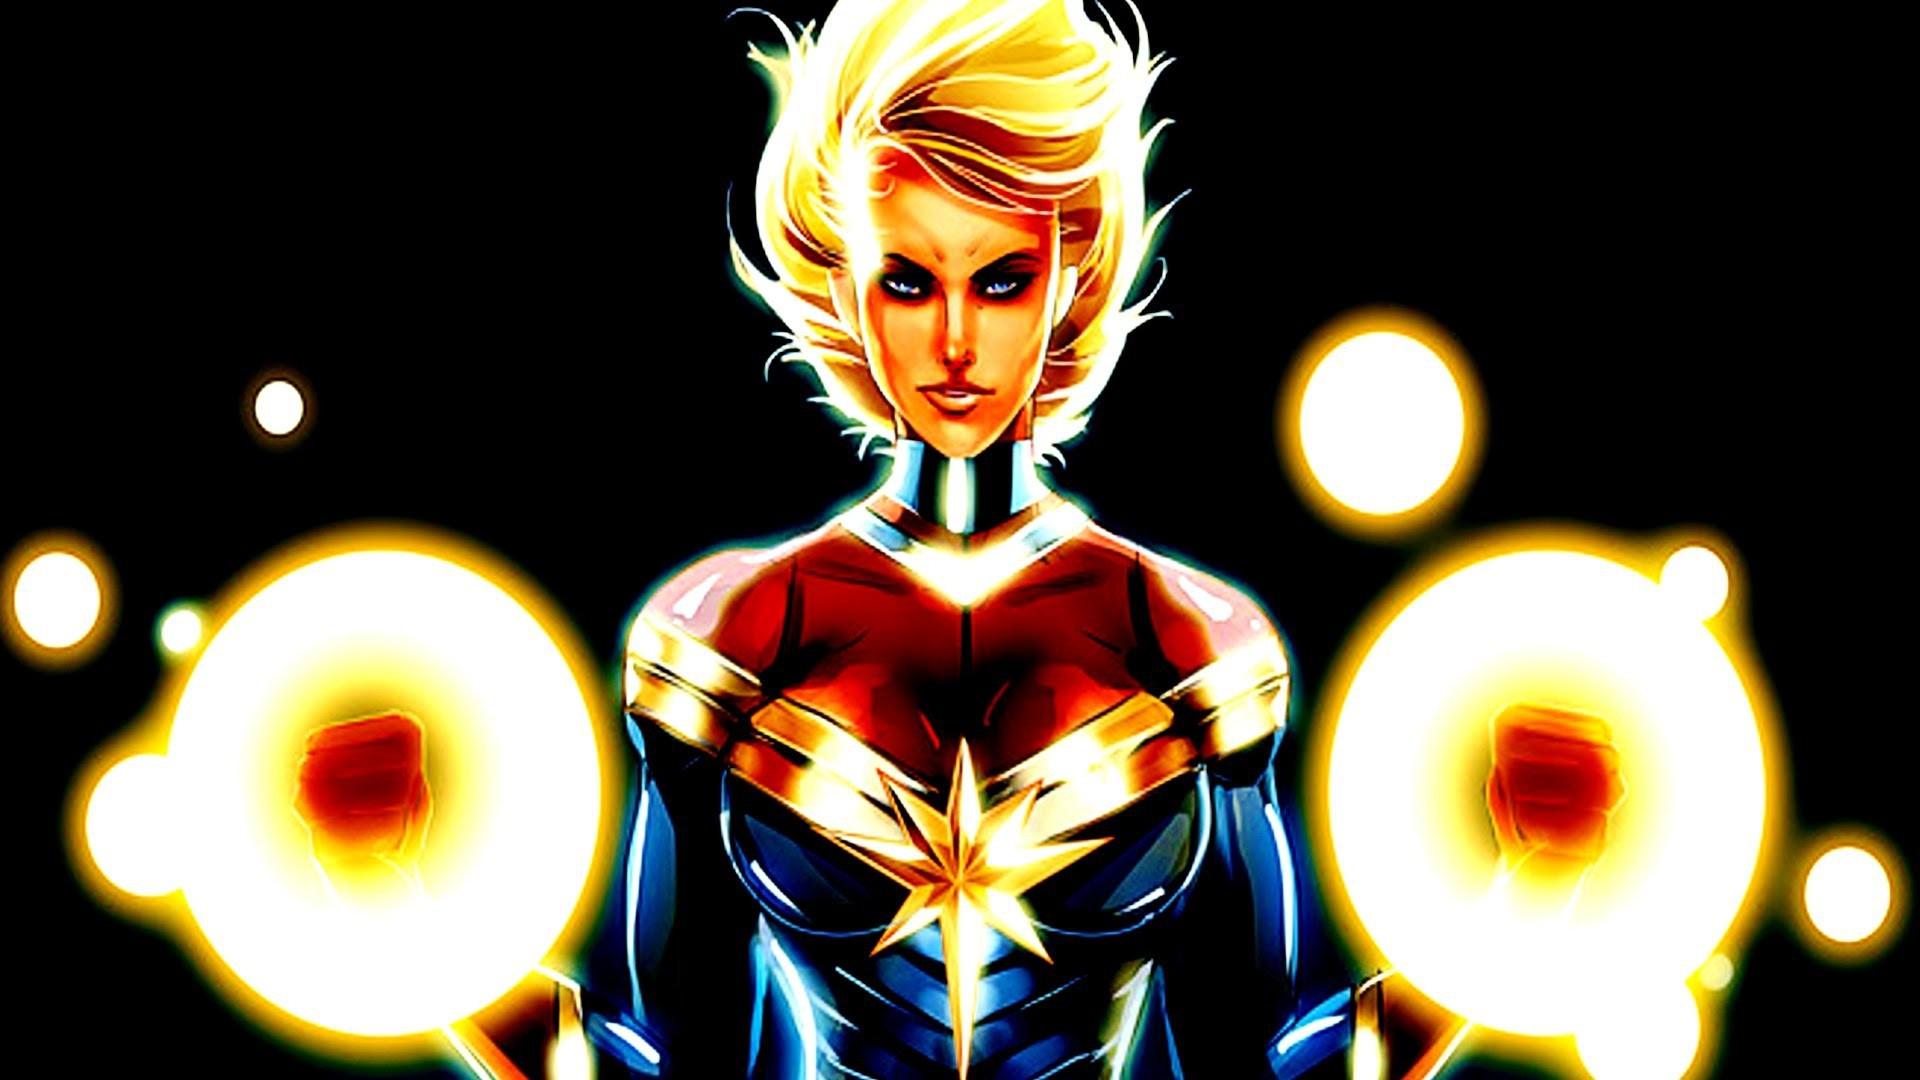 Captain Marvel Wallpaper - Cool Wallpapers Of Captain Marvel - HD Wallpaper 